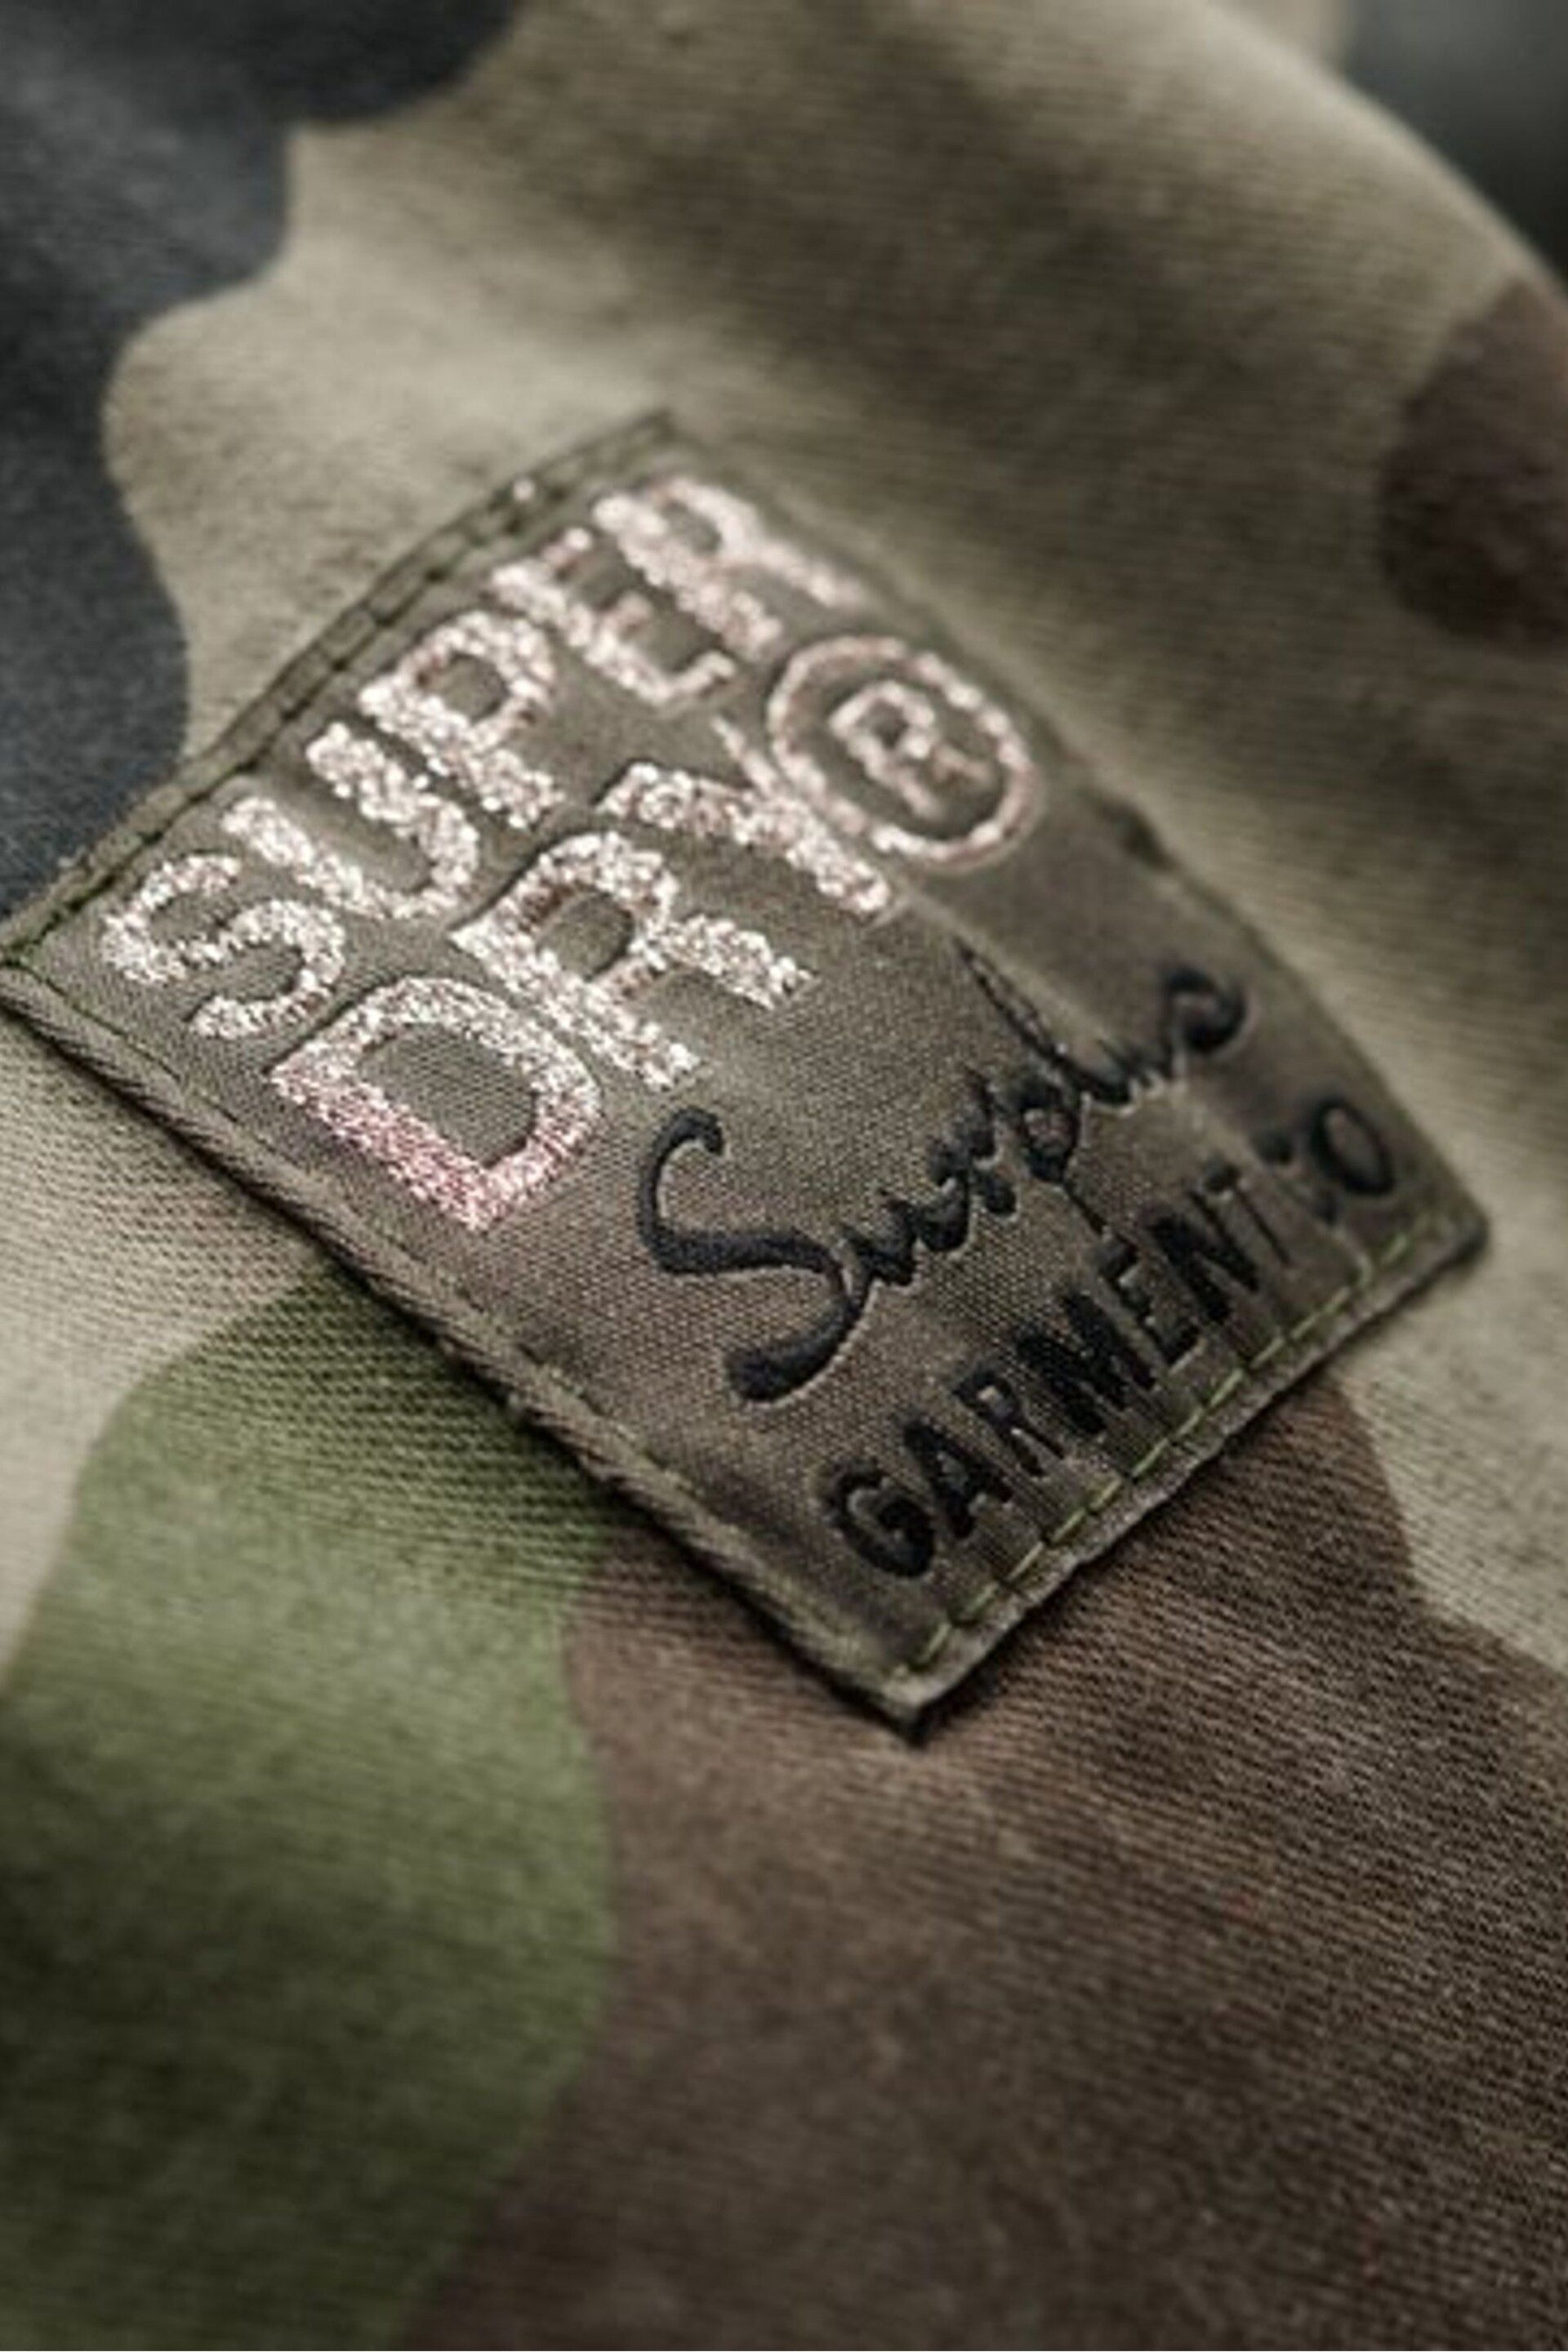 Superdry Green Military M65 Jacket - Image 5 of 5